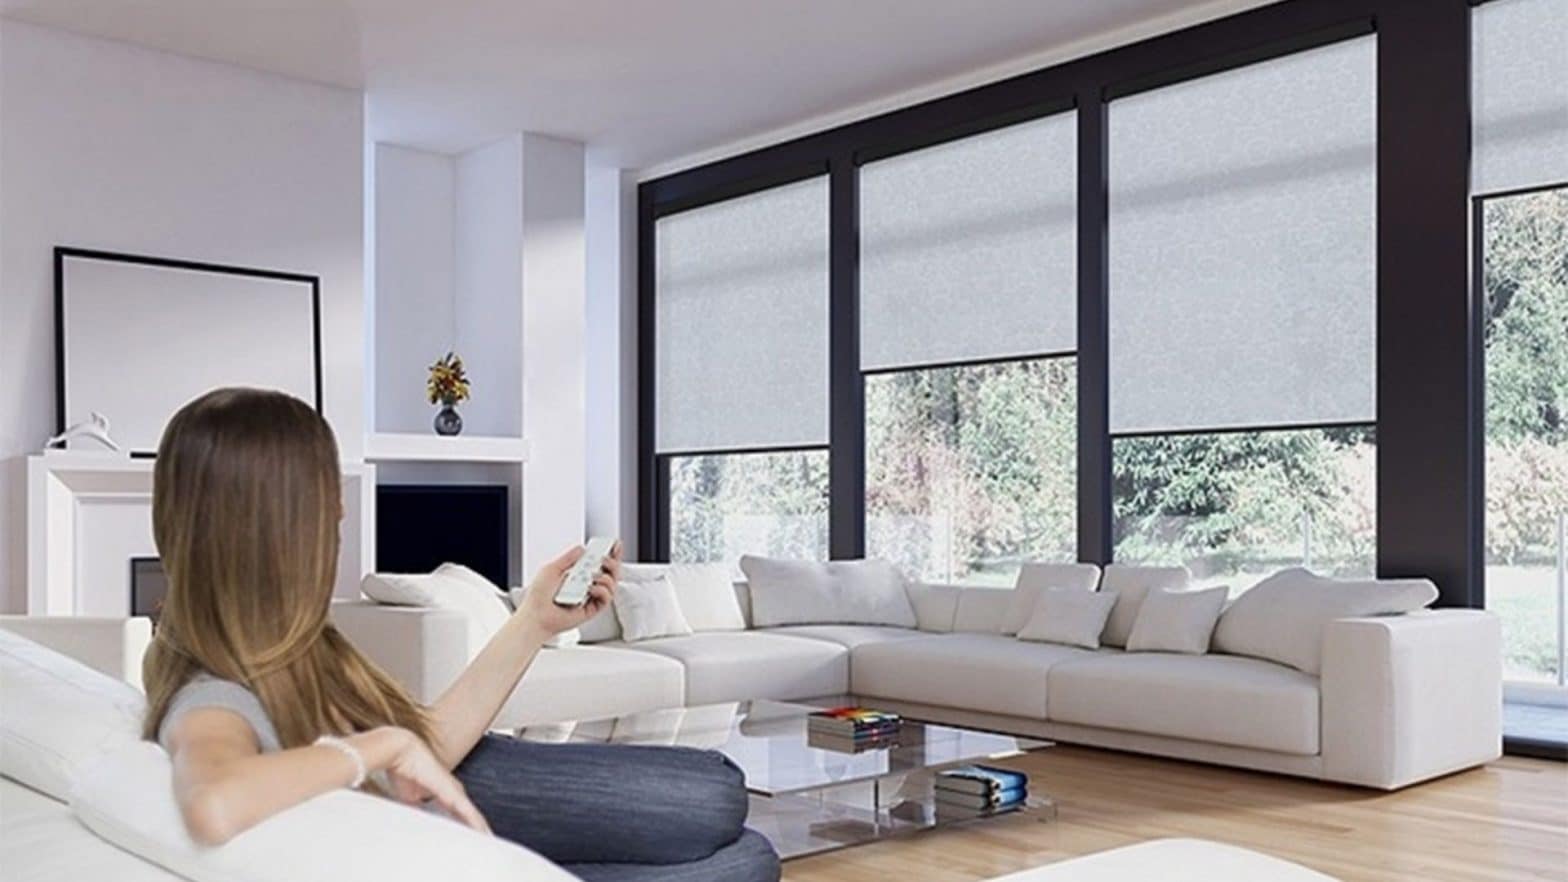 What Are the Advantages of Using Roller and Motorized Blinds